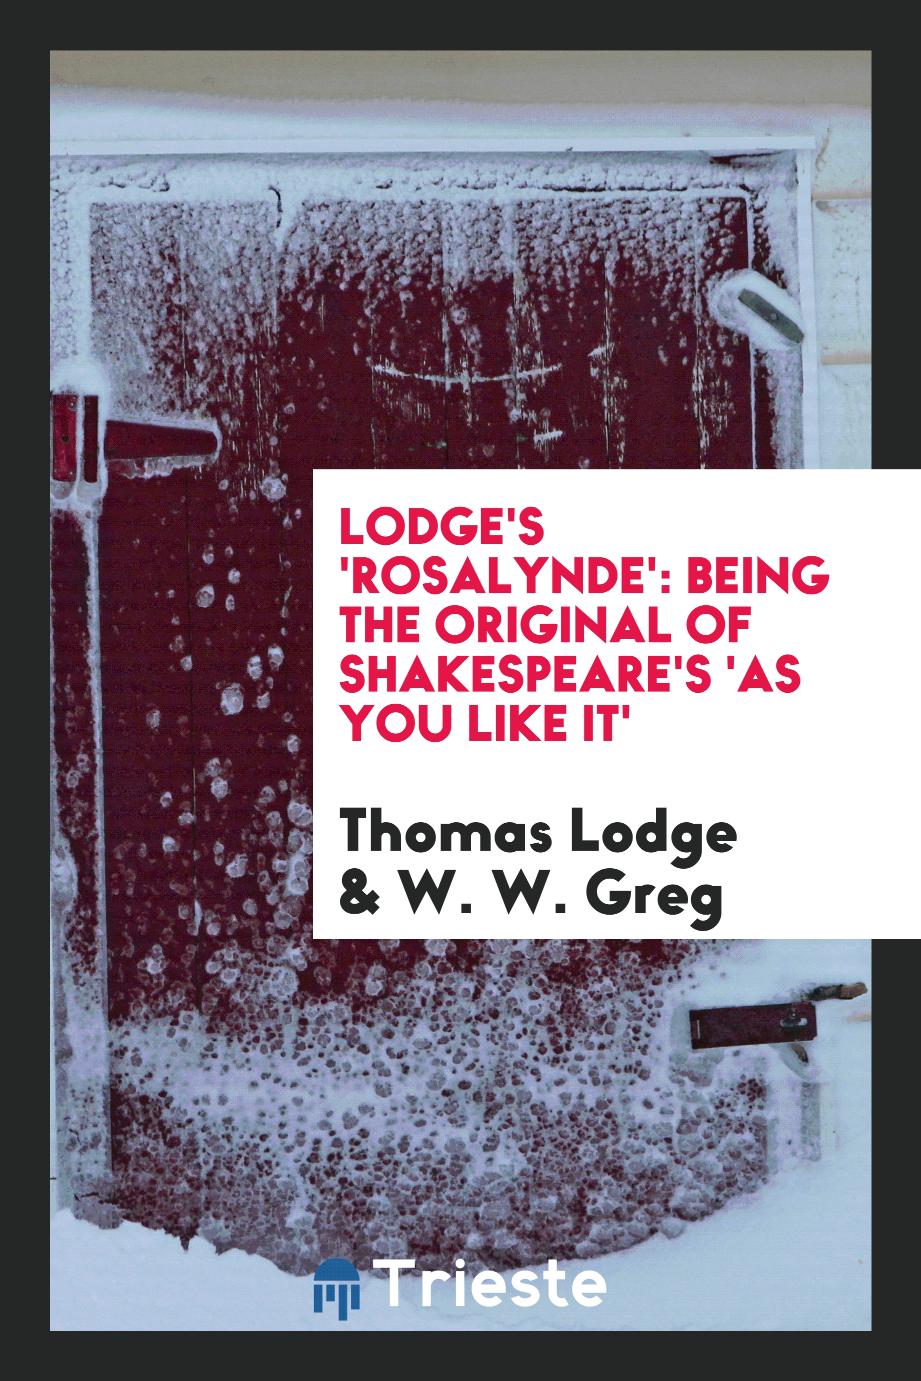 Lodge's 'Rosalynde': being the original of Shakespeare's 'As you like it'